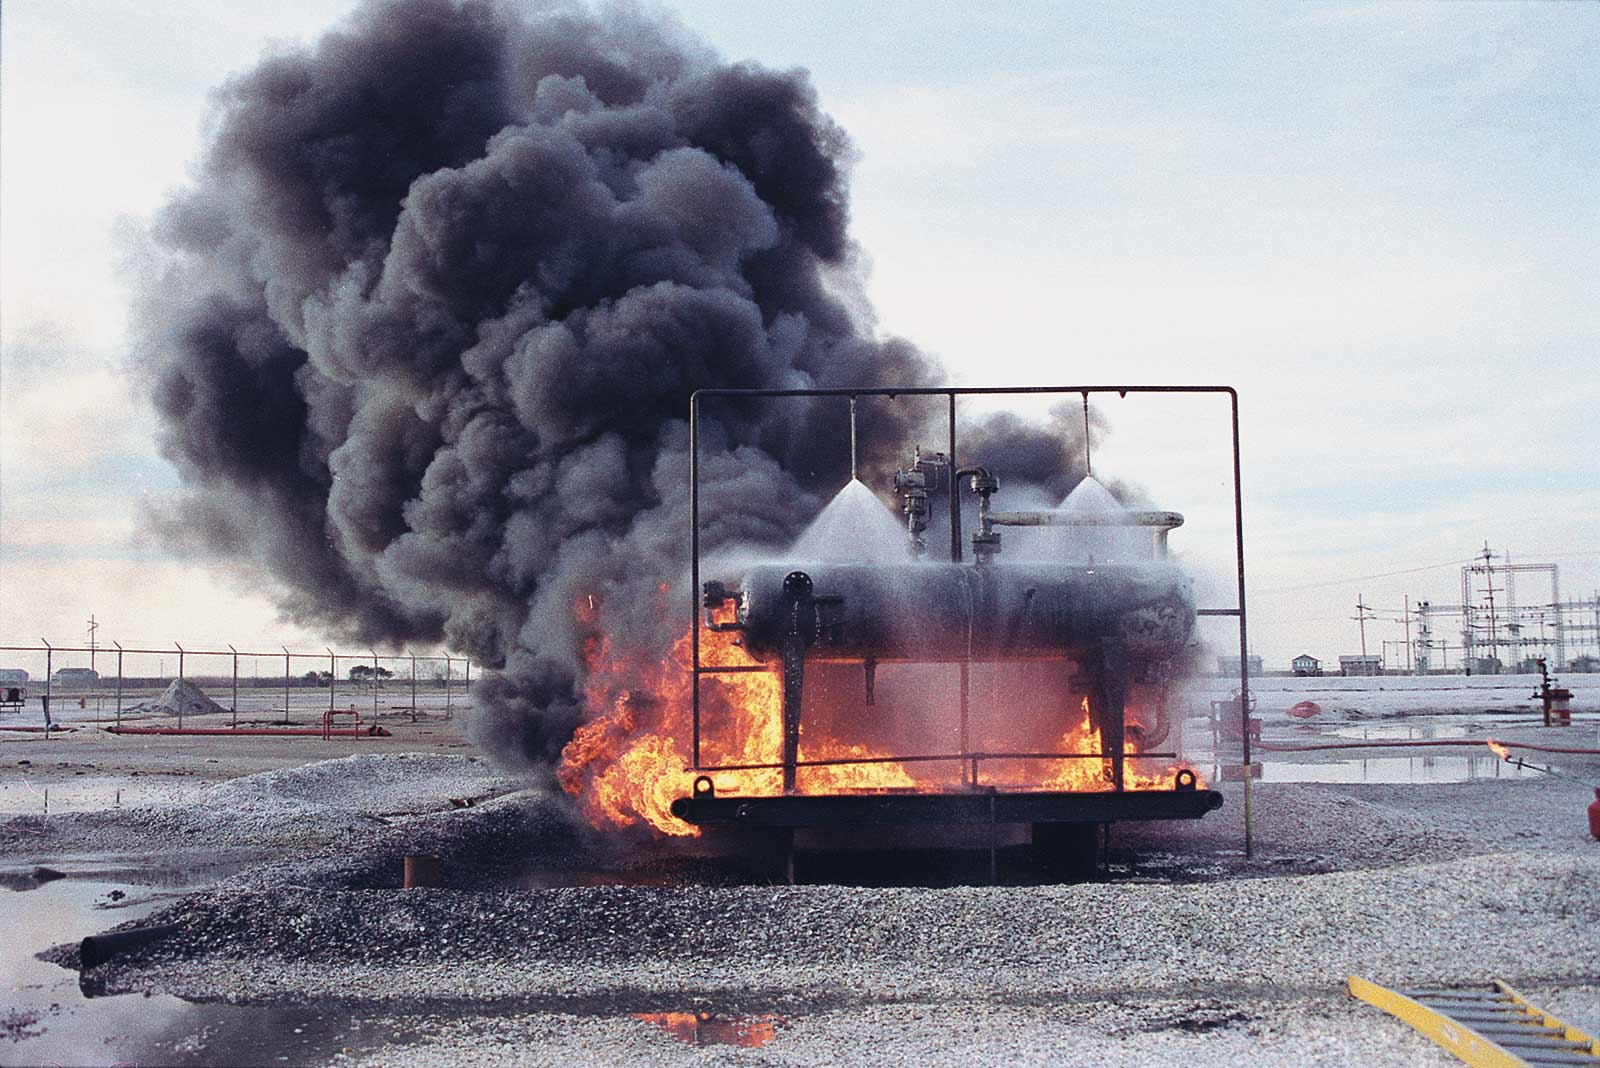 Chemical tank fire protection test of two spiral fire protection nozzles mounted on water pipes spraying a deluge of water onto a small chemical tank surrounded by flames